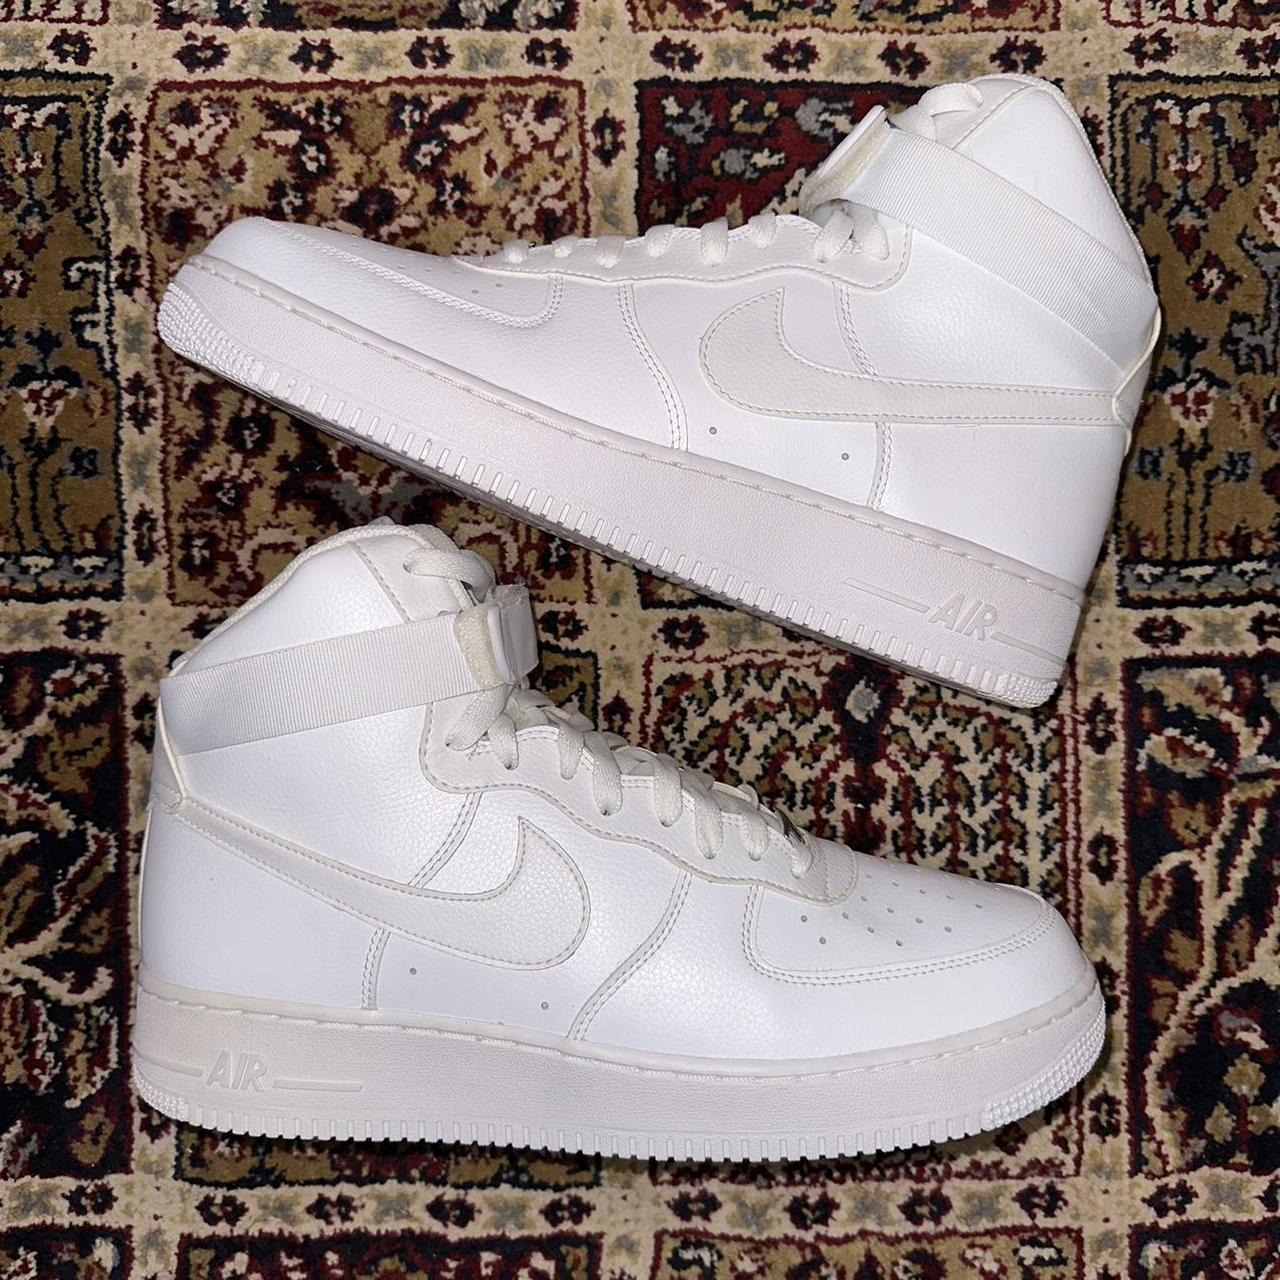 Nike Air Force 1 high Shoes have been worn once and... - Depop